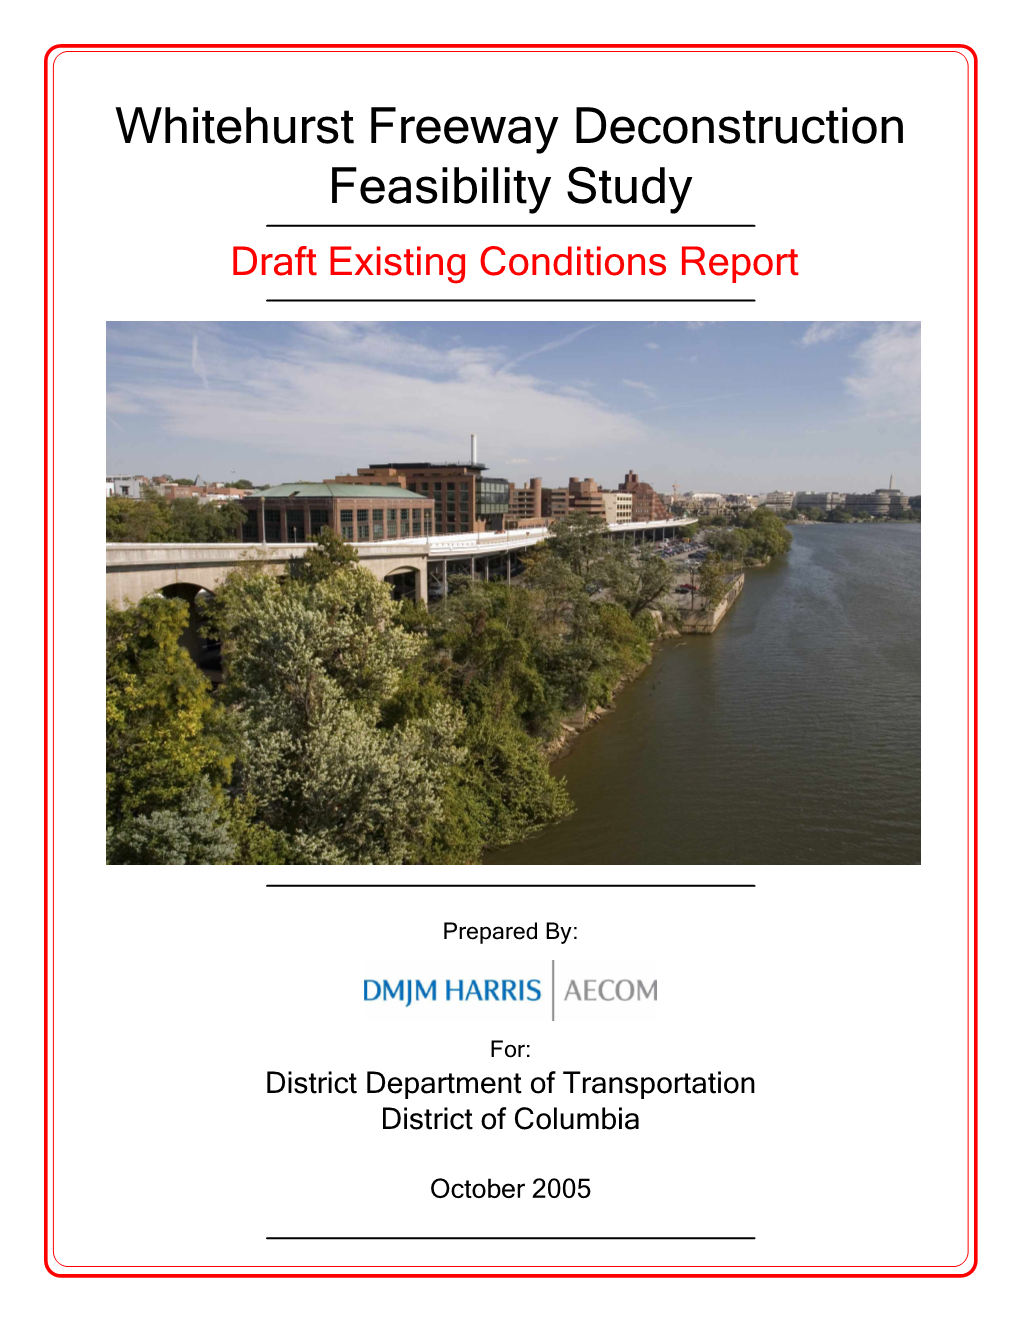 Whitehurst Freeway Existing Conditions Report